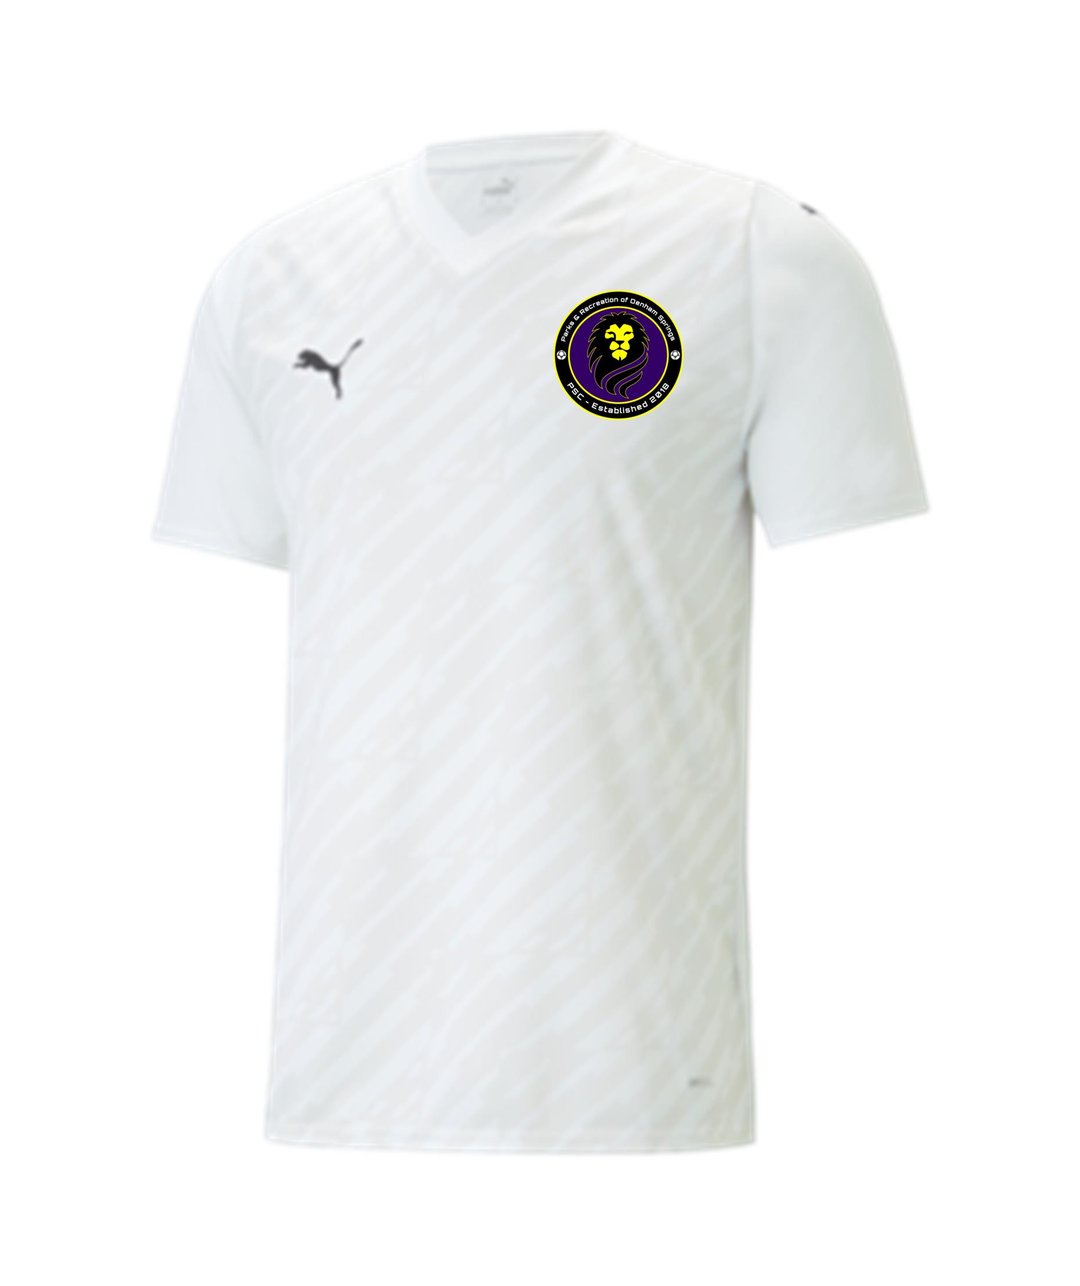 PUMA PARDS Youth Team Ultimate Jersey - White PARDS 2325   - Third Coast Soccer